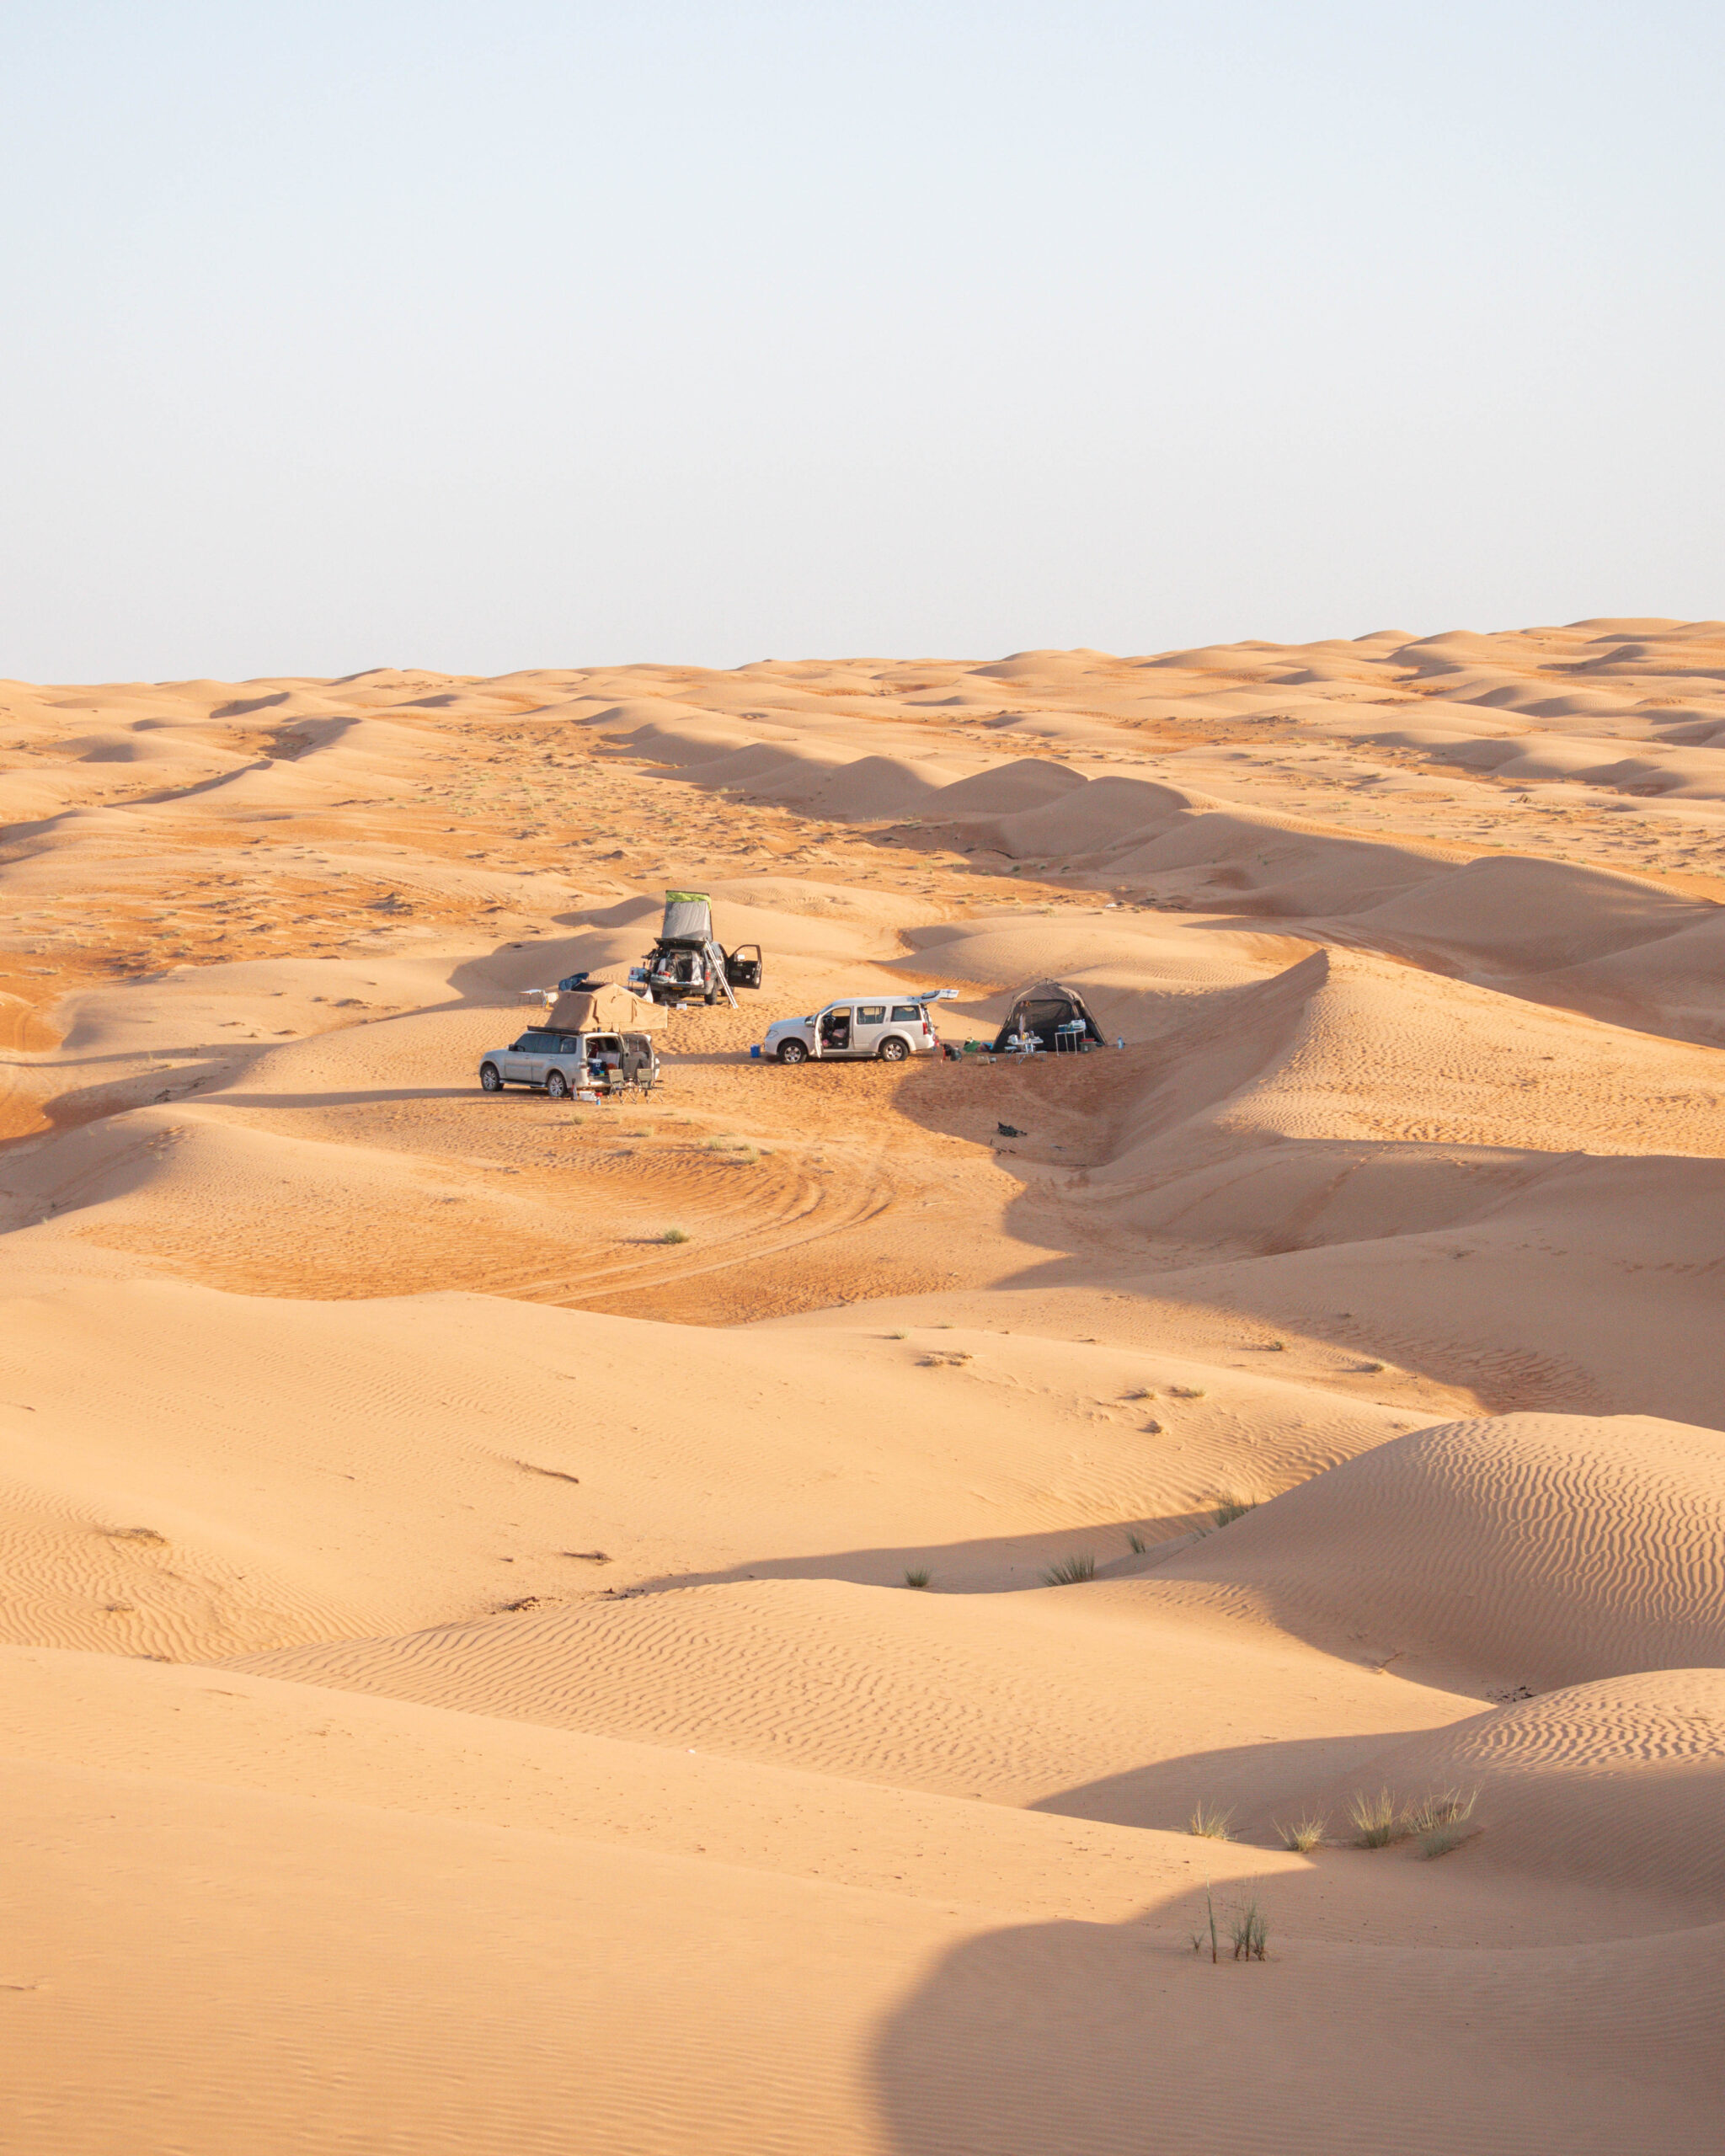 DESERT CAMPING IN OMAN: A LOCAL EXPAT’S GUIDE